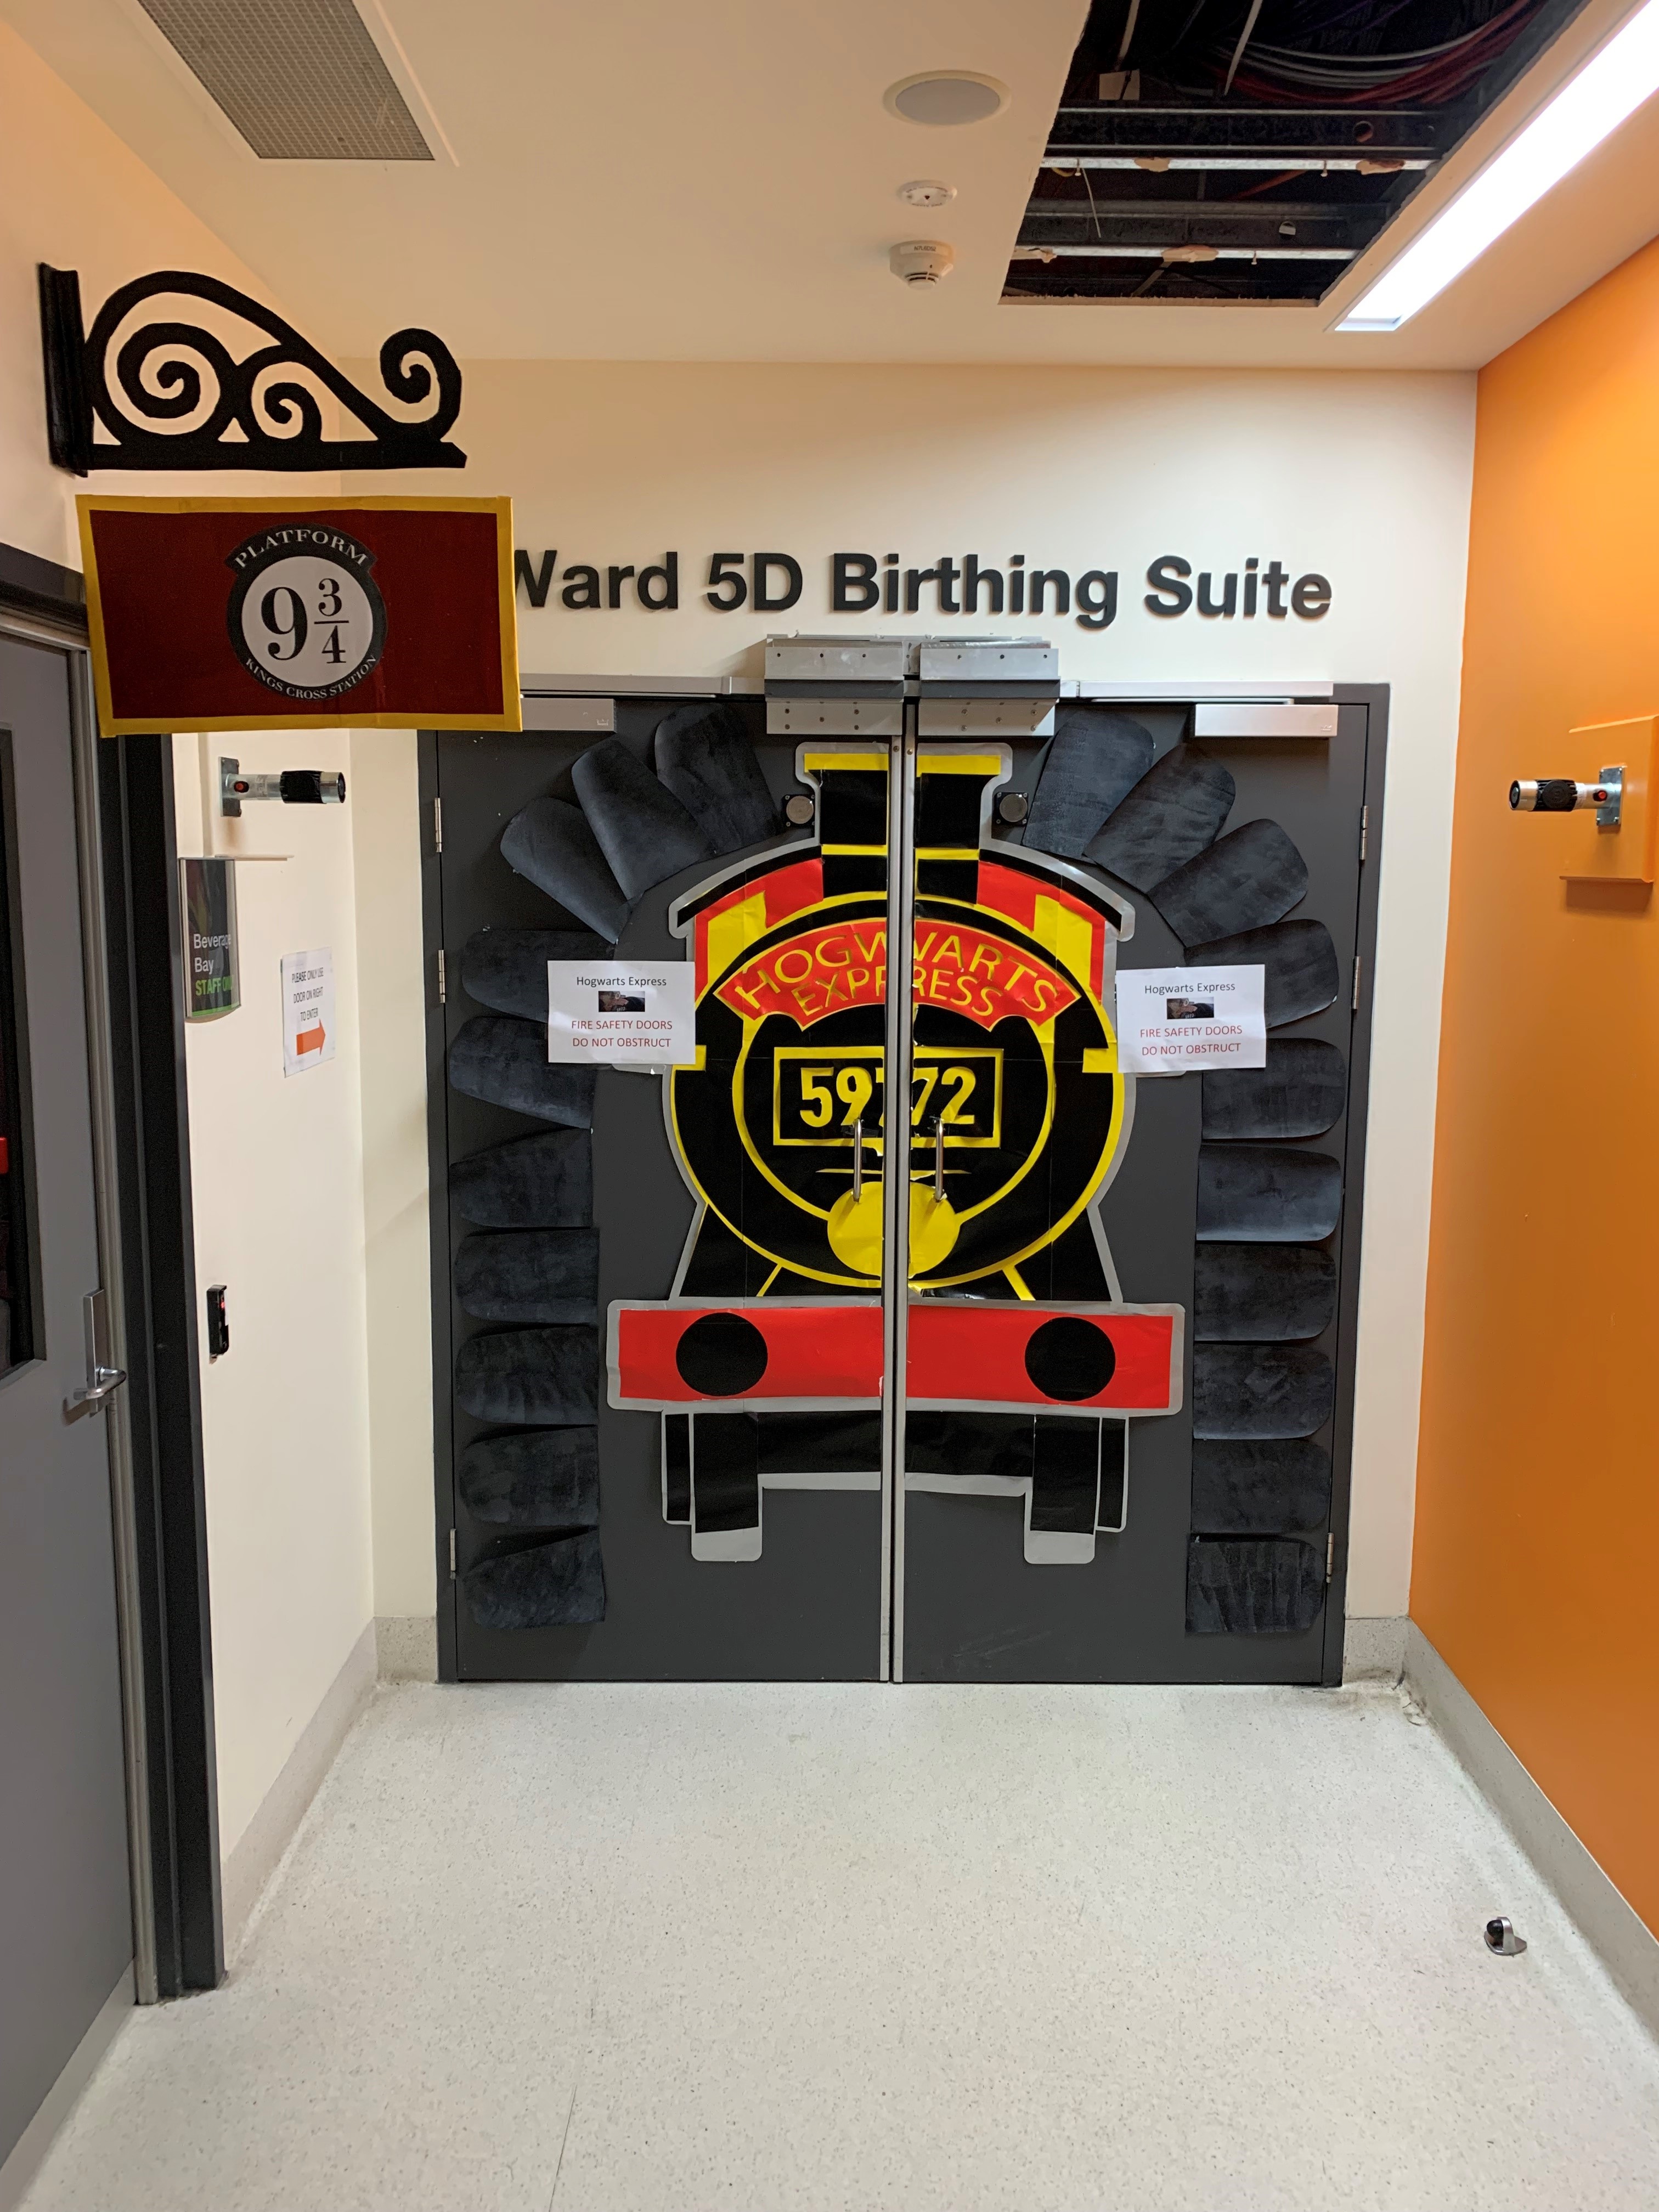 Ipswich Hospital's Harry Potter-themed Ward 5D Birthing Suite